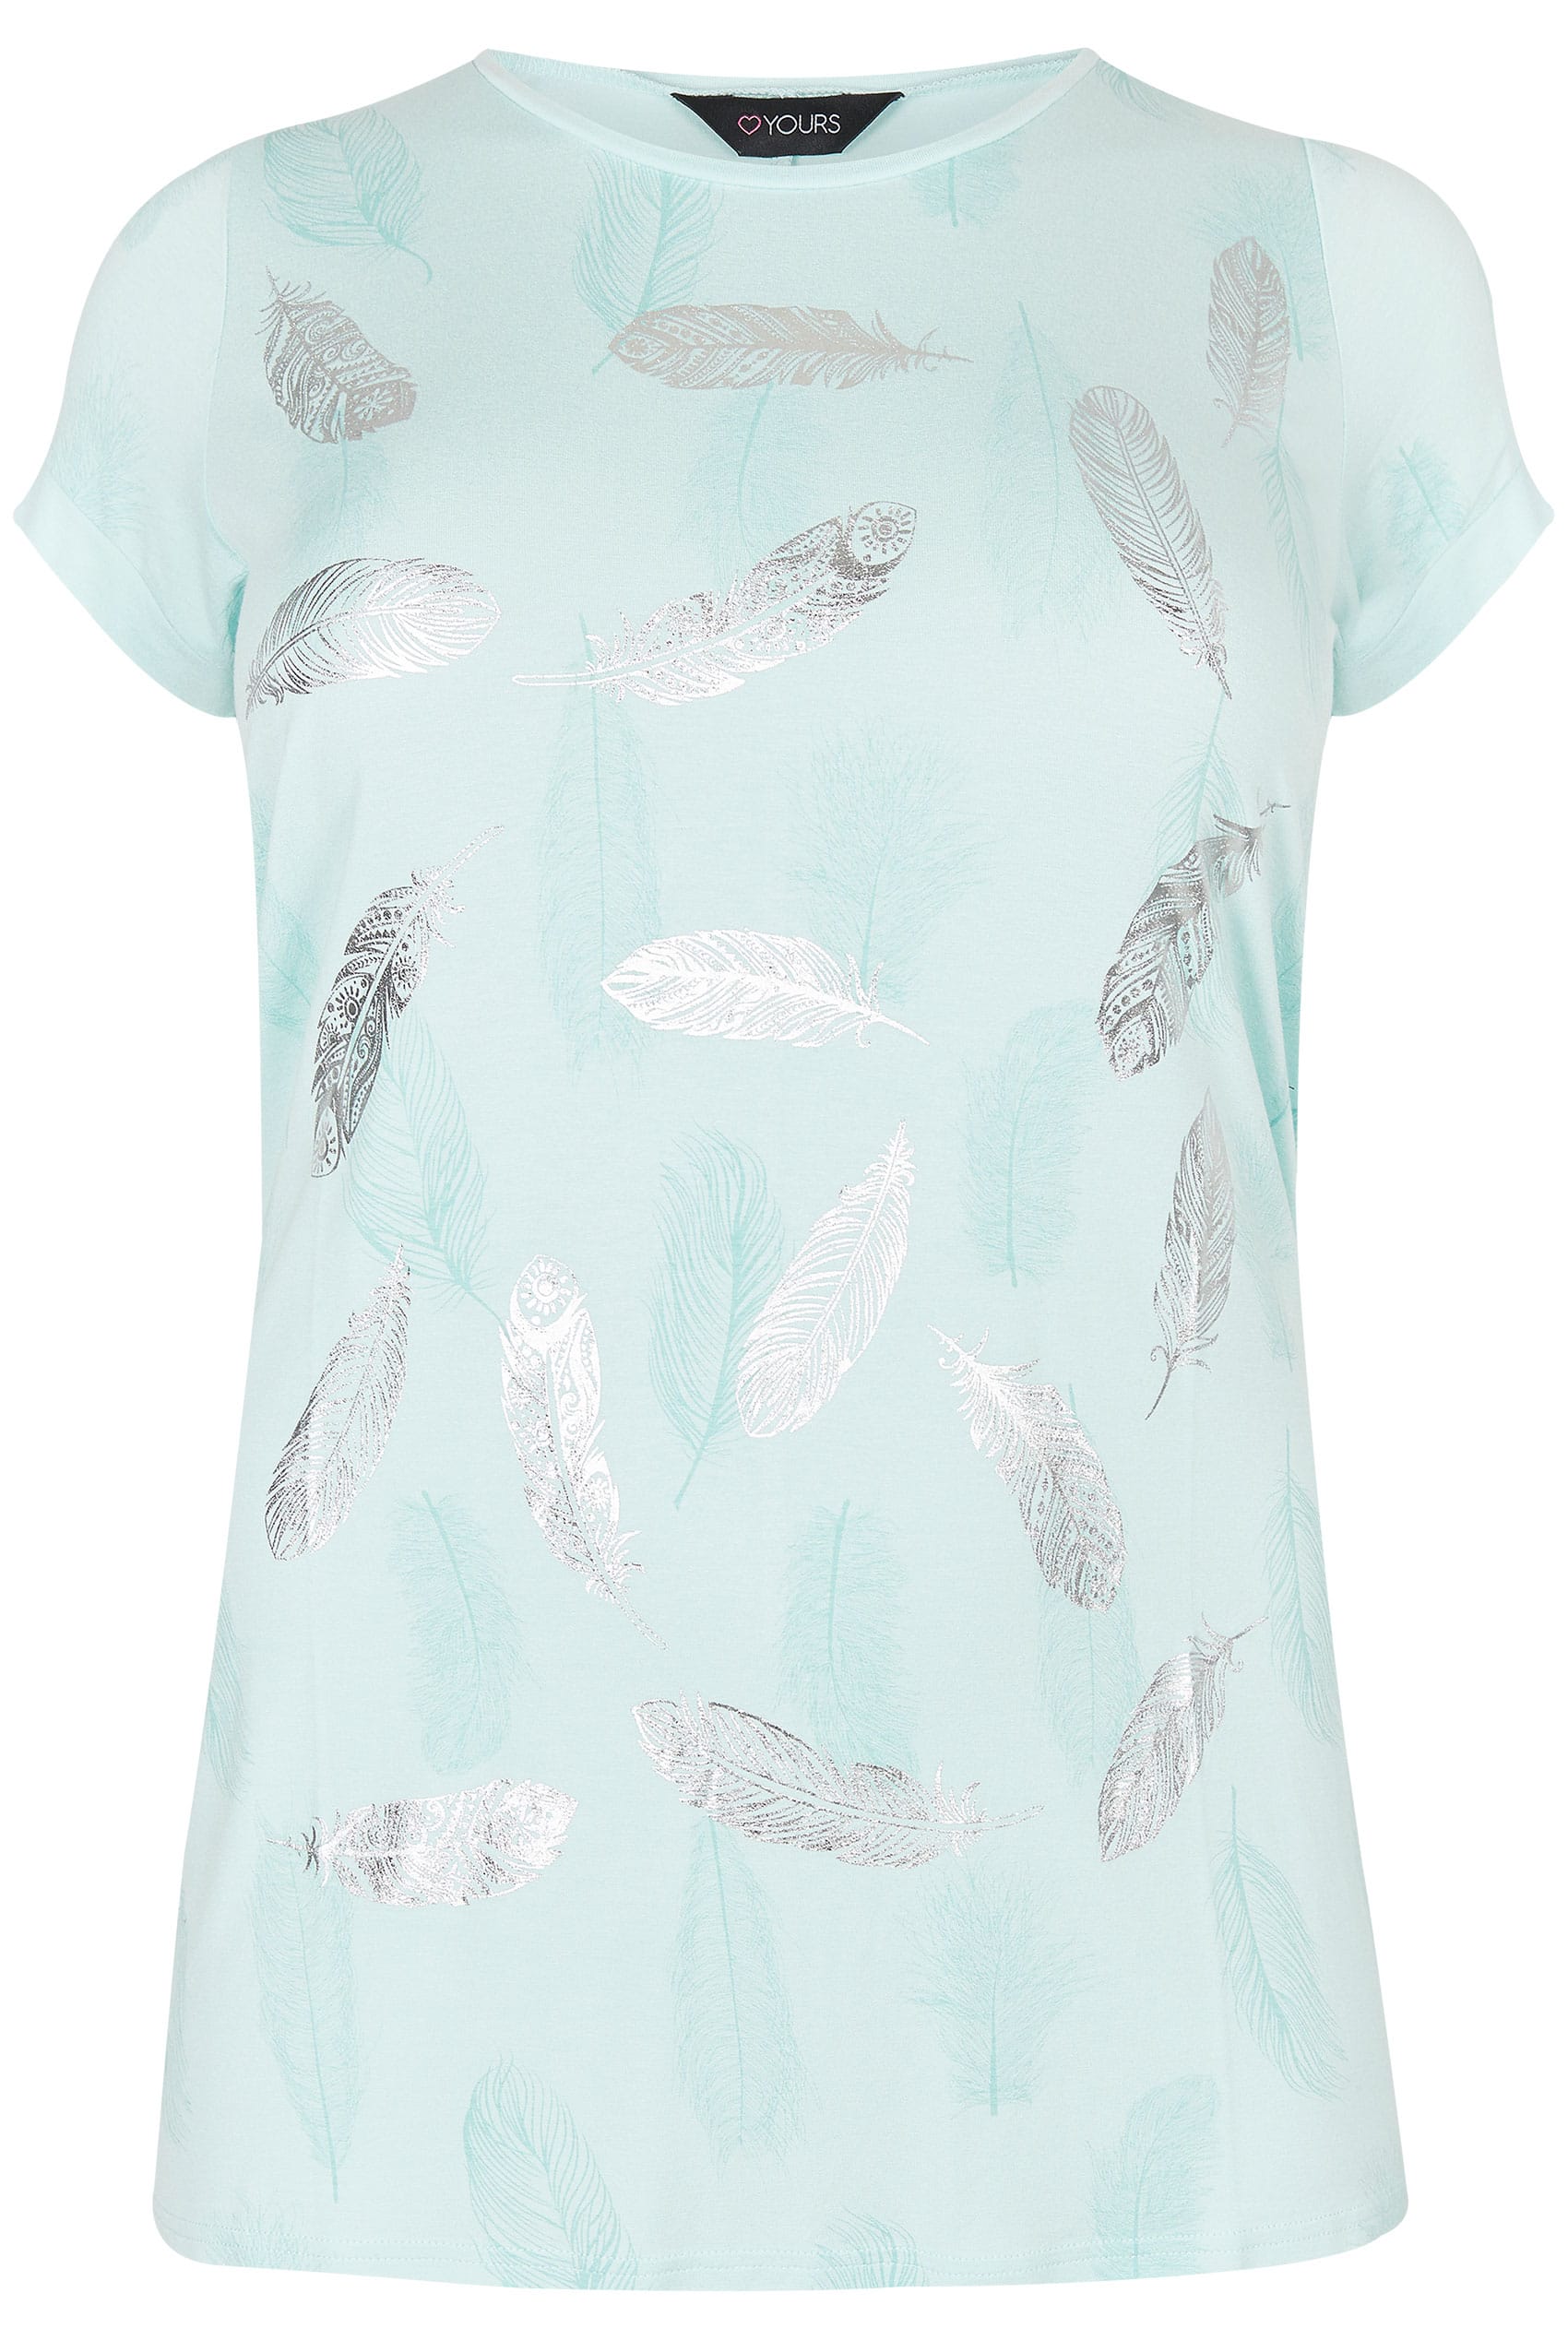 Pale Turquoise Foil Feather Print T-Shirt, plus size 16 to 36